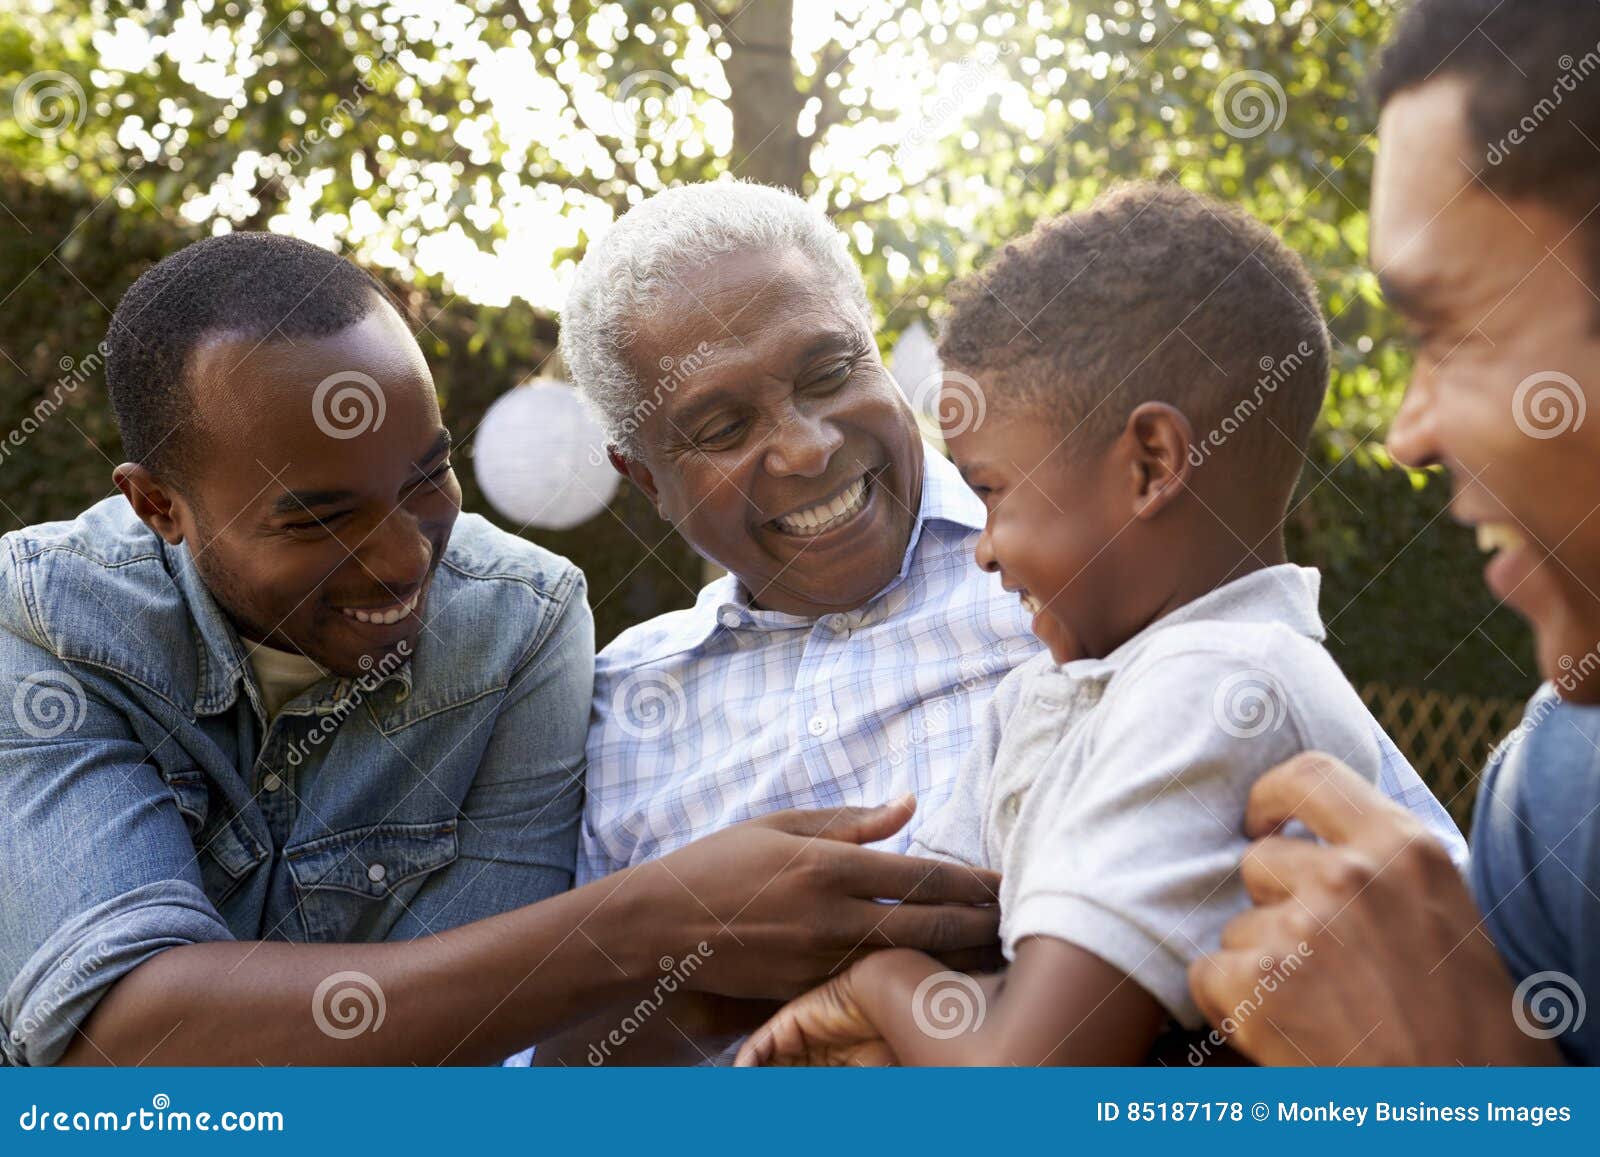 black grandfather, sons and grandson talking in a garden